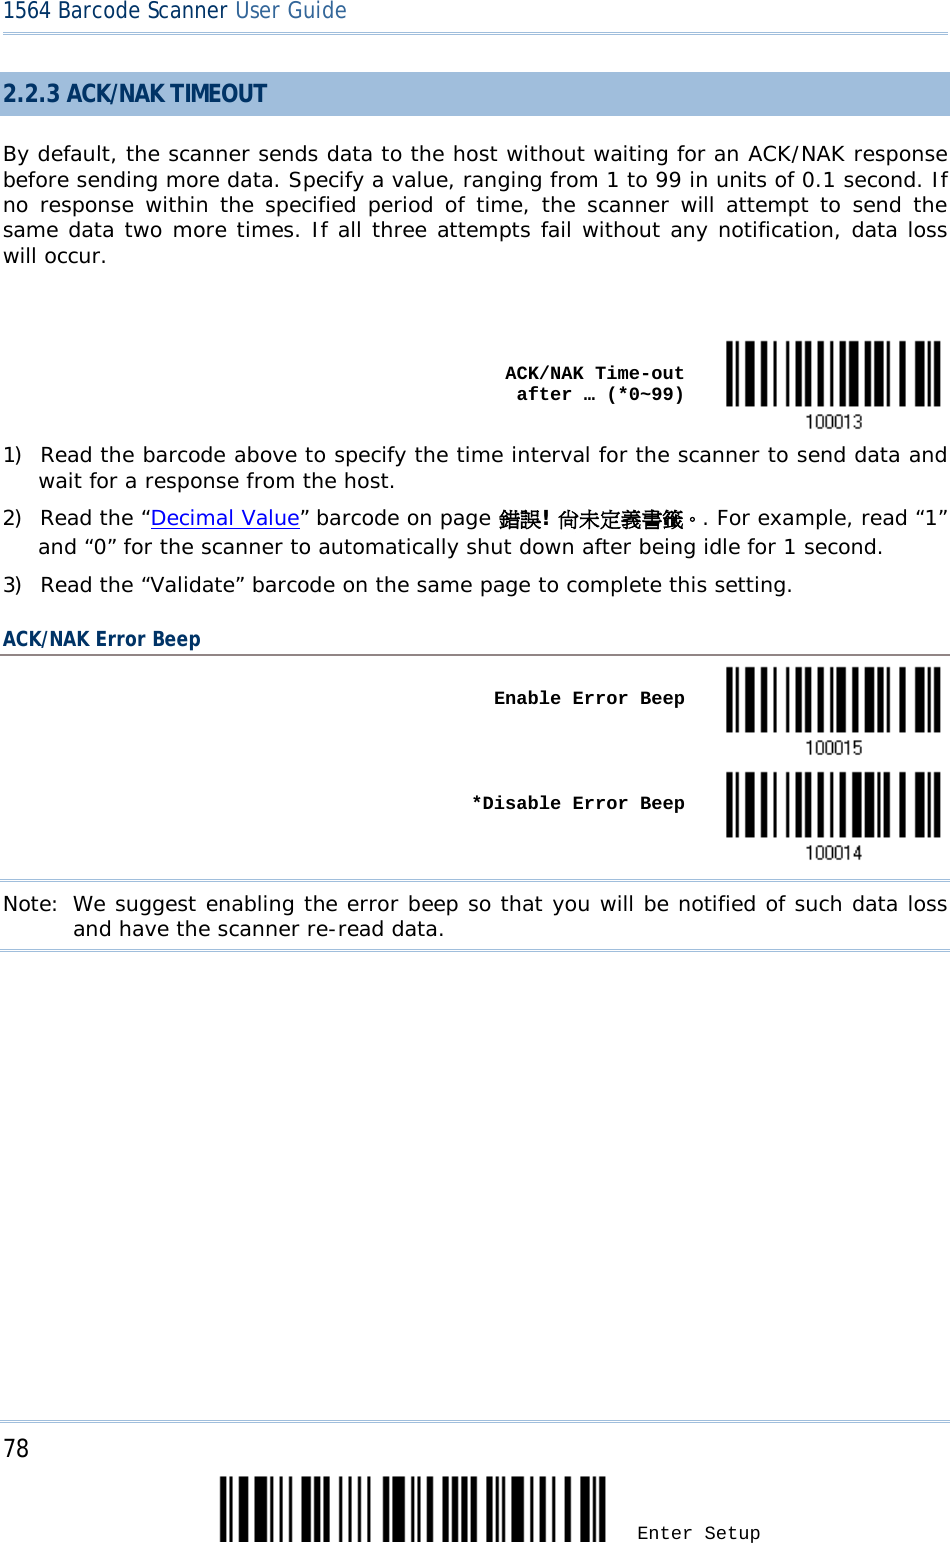 78 Enter Setup 1564 Barcode Scanner User Guide  2.2.3 ACK/NAK TIMEOUT By default, the scanner sends data to the host without waiting for an ACK/NAK response before sending more data. Specify a value, ranging from 1 to 99 in units of 0.1 second. If no response within the specified period of time, the scanner will attempt to send the same data two more times. If all three attempts fail without any notification, data loss will occur.     ACK/NAK Time-out after … (*0~99)  1) Read the barcode above to specify the time interval for the scanner to send data and wait for a response from the host.       2) Read the “Decimal Value” barcode on page 錯誤! 尚未定義書籤。. For example, read “1” and “0” for the scanner to automatically shut down after being idle for 1 second.  3) Read the “Validate” barcode on the same page to complete this setting. ACK/NAK Error Beep    Enable Error Beep       *Disable Error Beep  Note: We suggest enabling the error beep so that you will be notified of such data loss and have the scanner re-read data.          